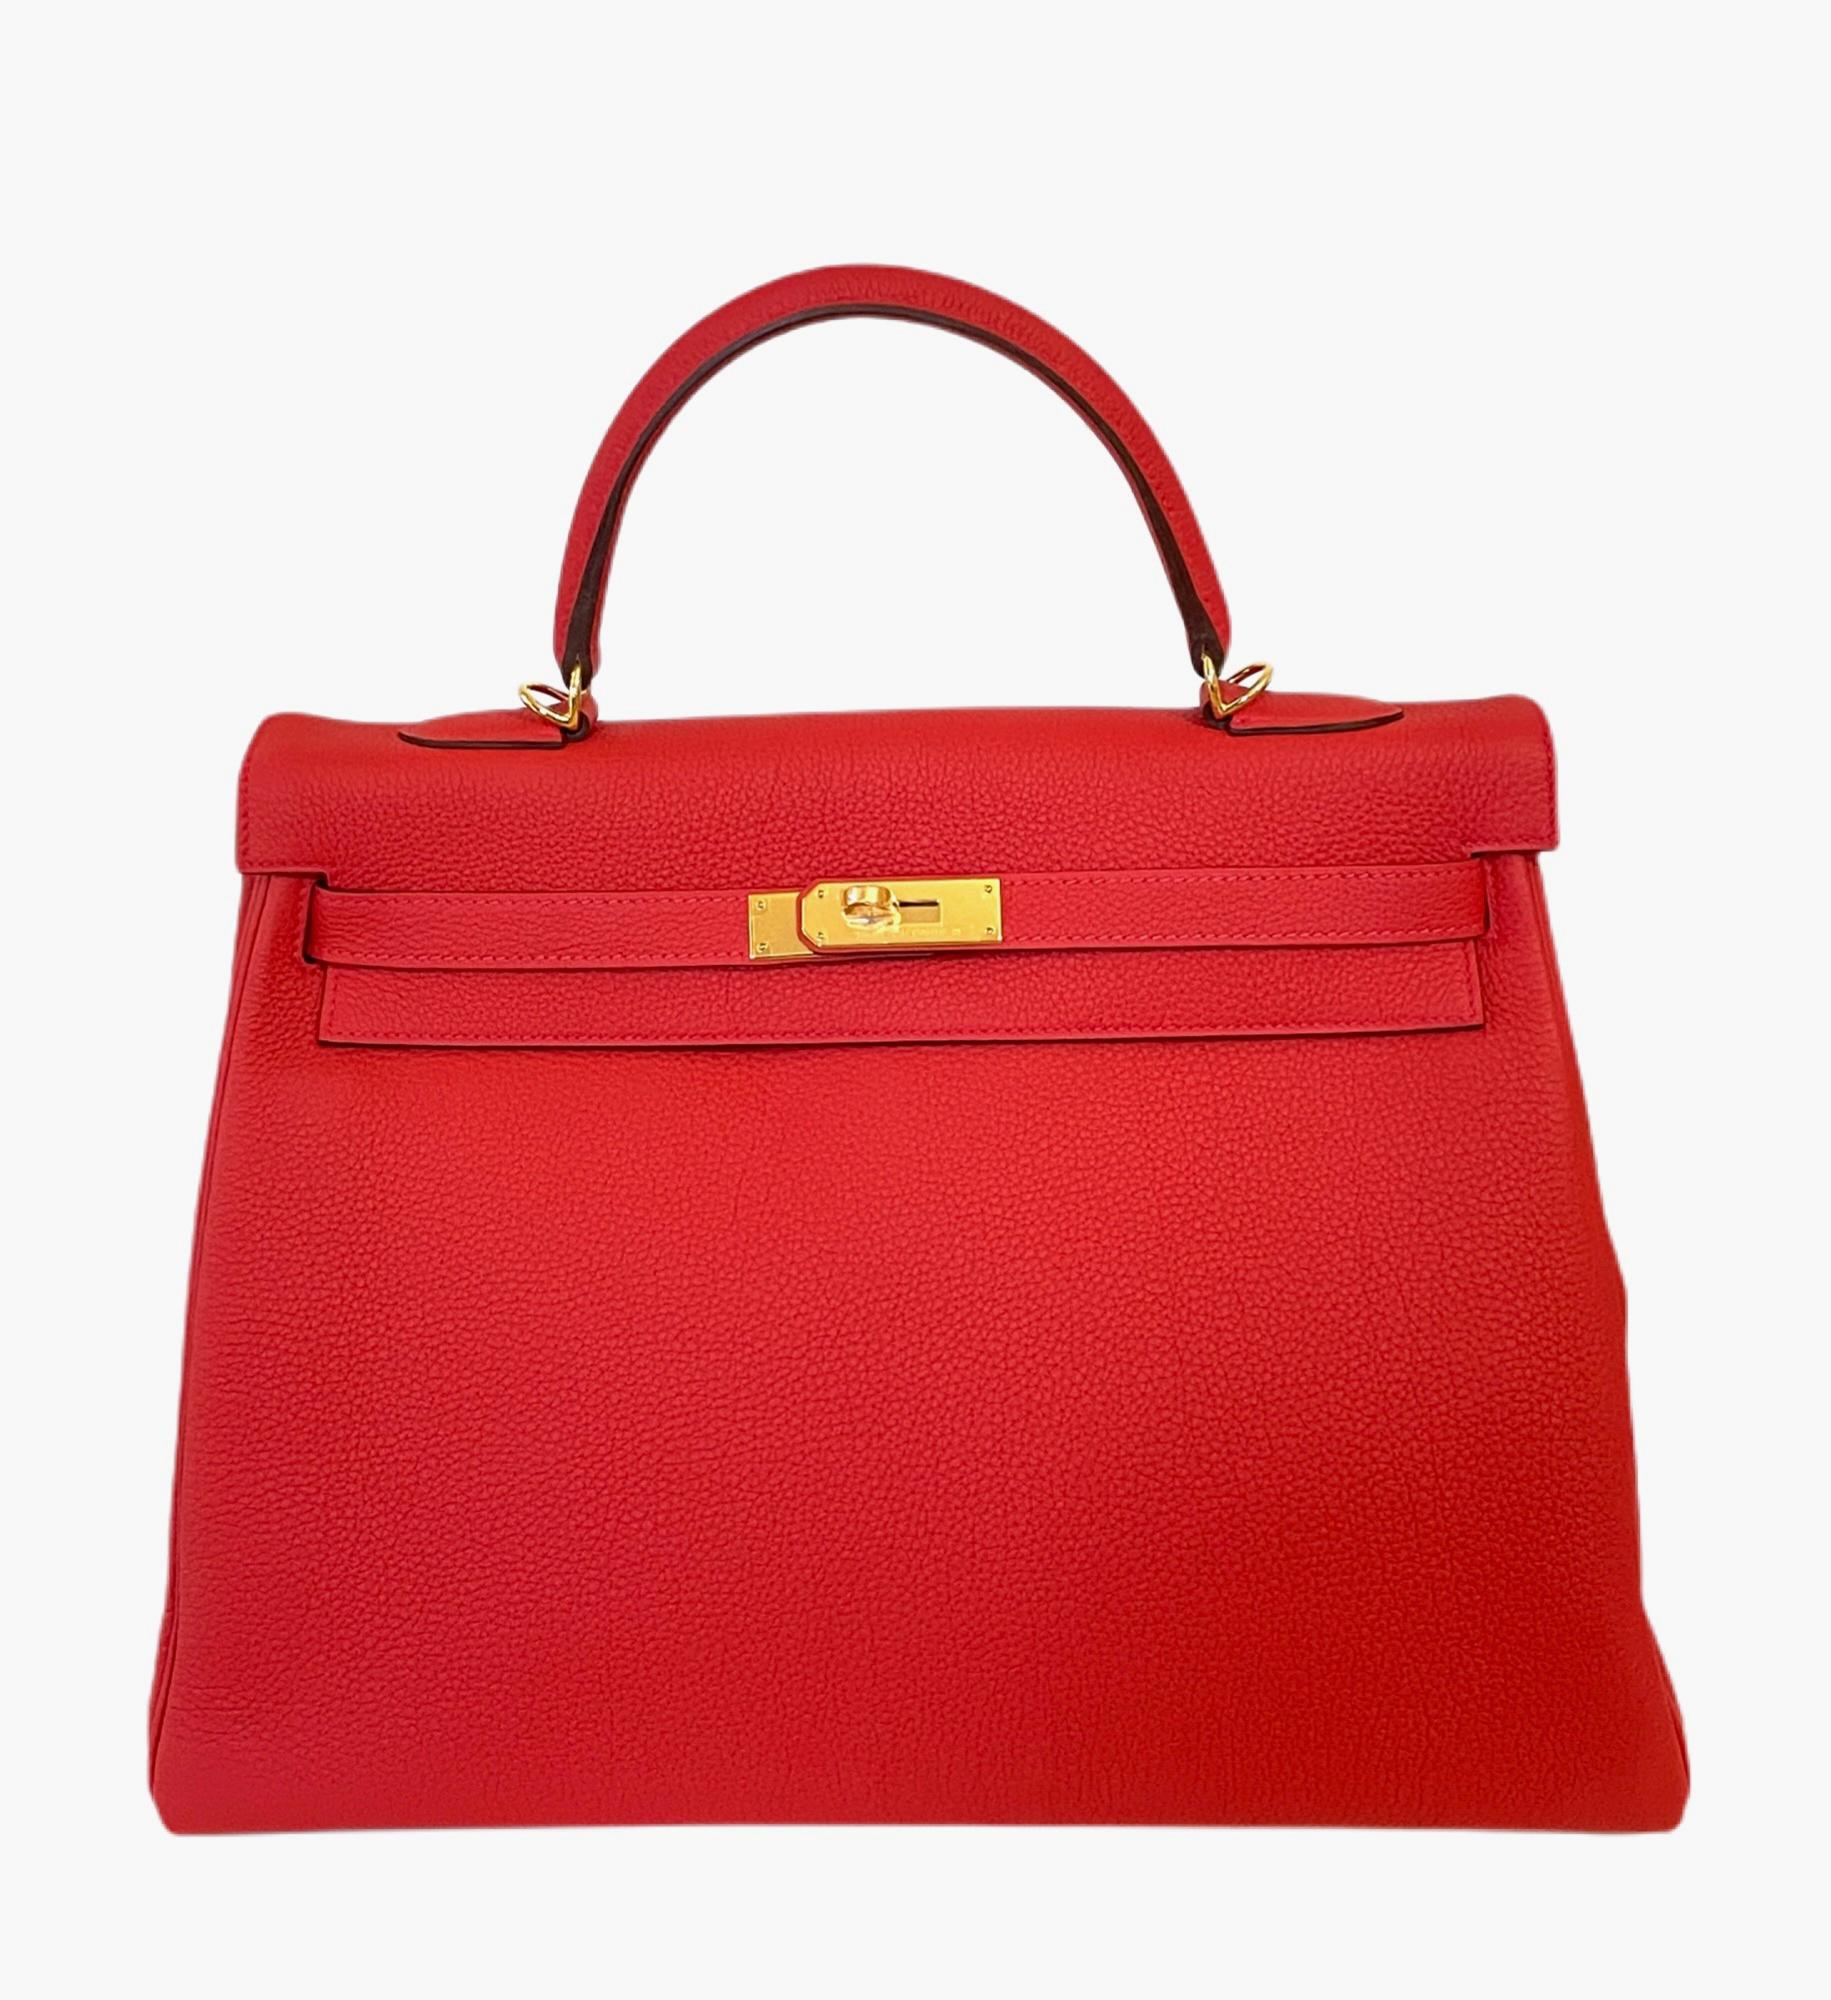 Stunning As New Hermes Kelly 35 Rouge Pivoine Togo Gold Hardware. 2017 New uncarried. 

Shop with Confidence from Lux Addicts. Authenticity Guaranteed!